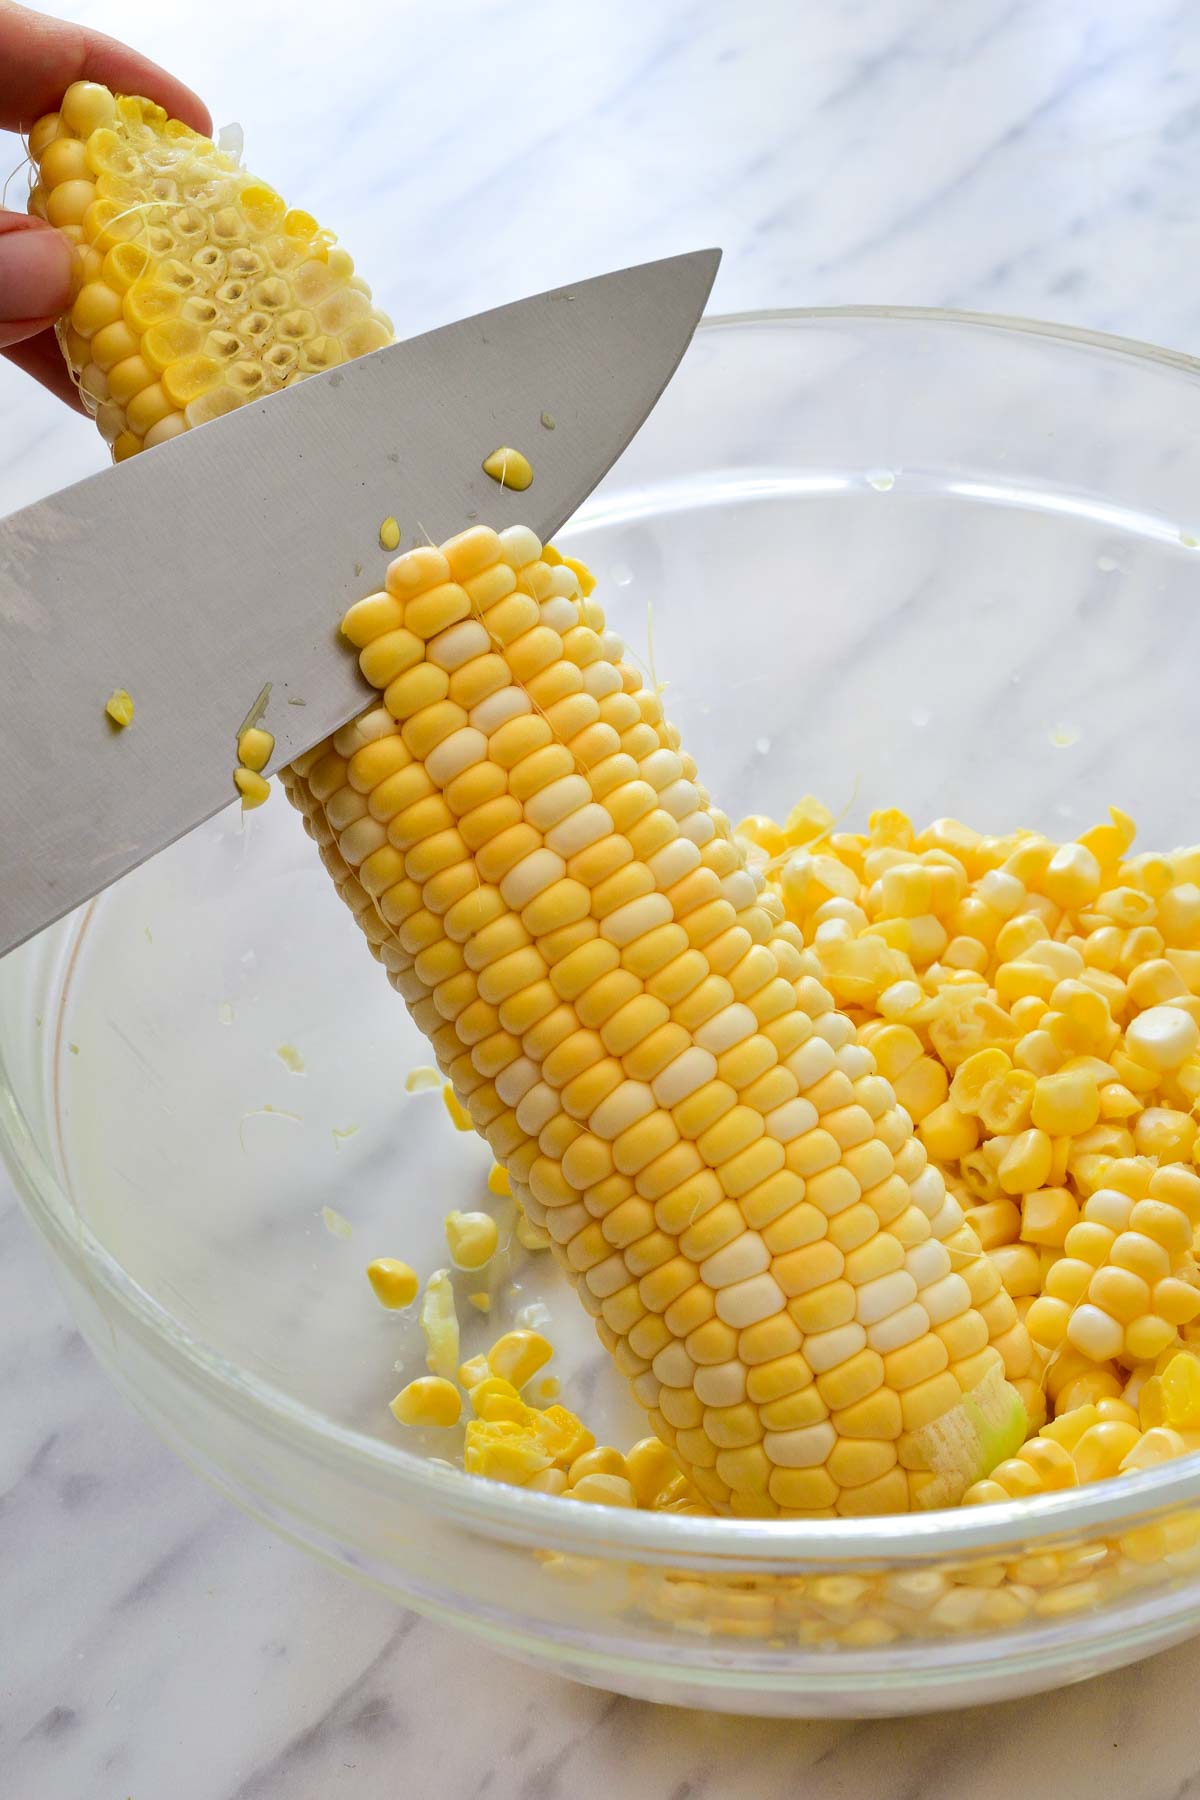 A knife cutting corn kernels off the cob over a glass bowl.